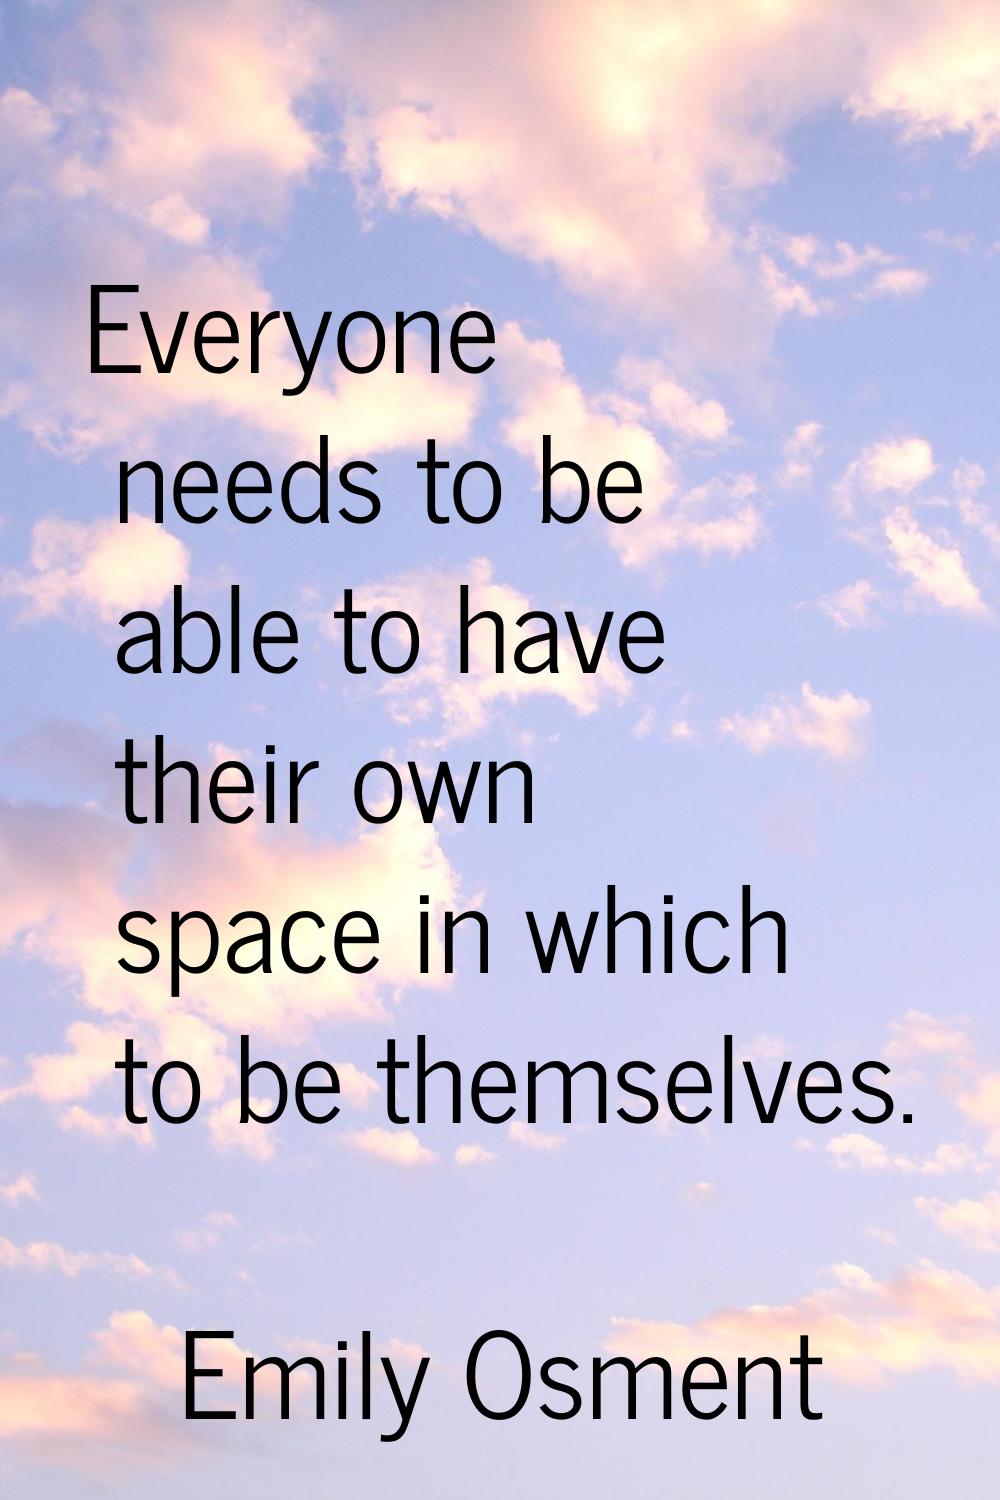 Everyone needs to be able to have their own space in which to be themselves.